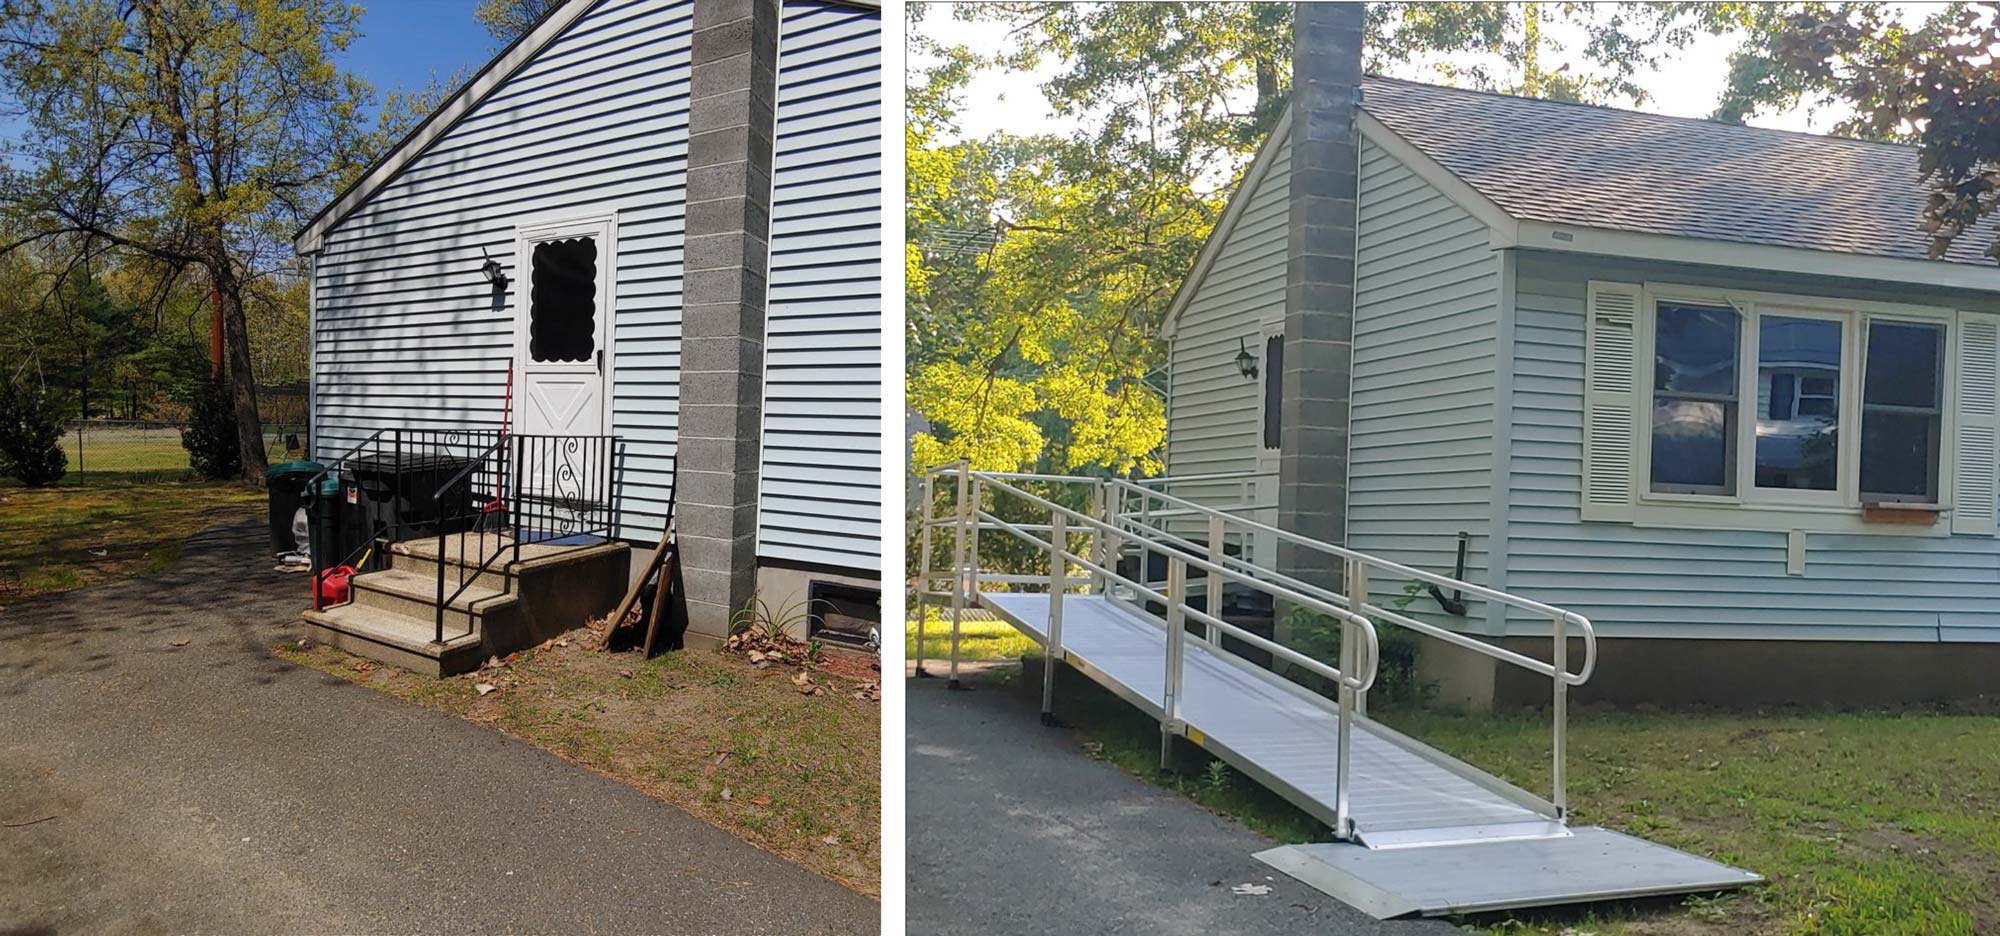 The Fontanellas' stairs before the Home Safety modifications (left), and the professionally- installed ramp after (right).